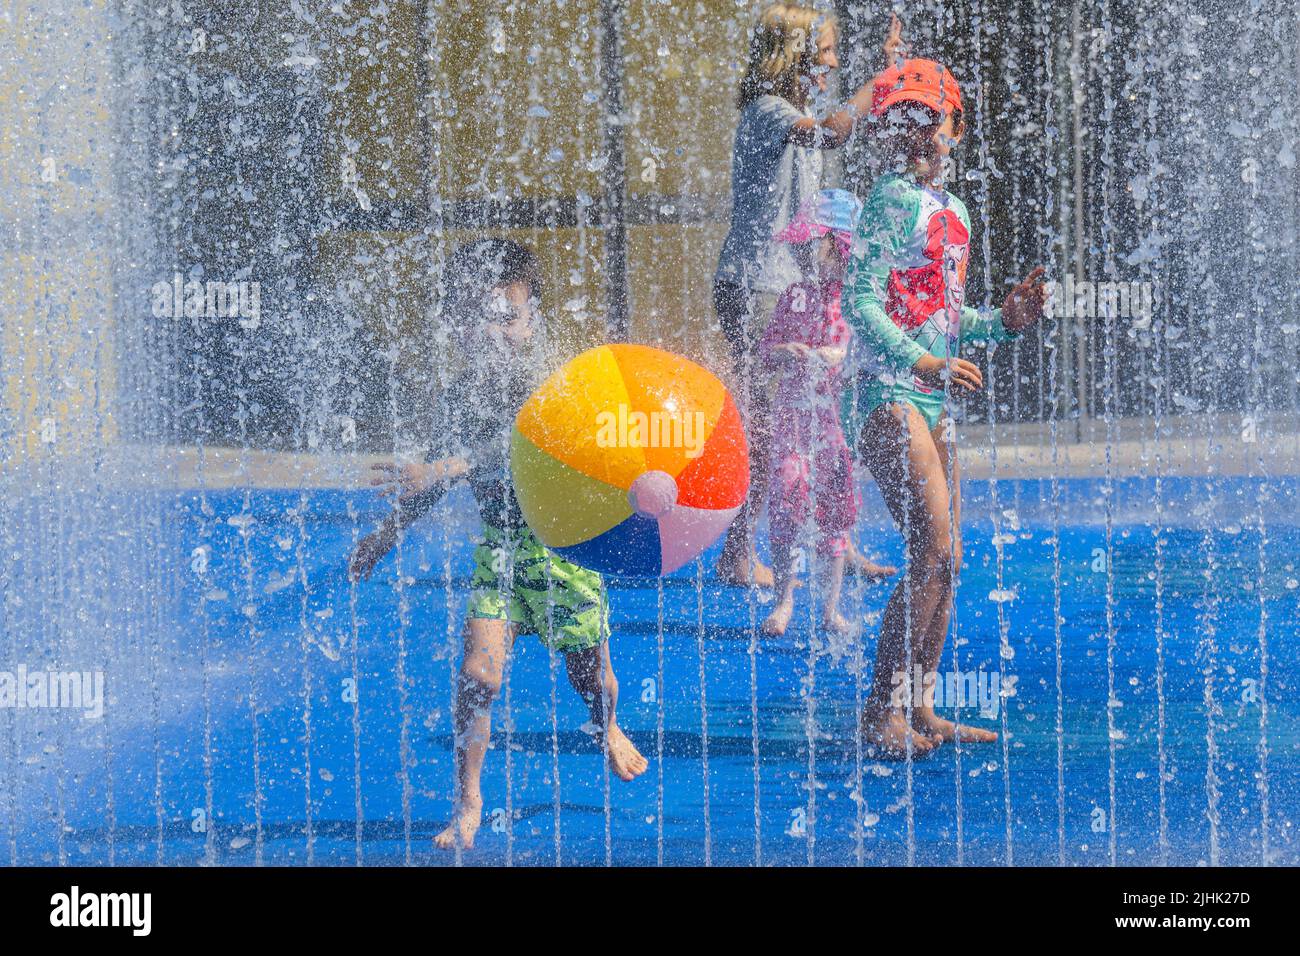 London, UK. 19th July, 2022. The hottest day of the year sees people cool themselves in the fountains of Jeppe Hein's Appearing Rooms at London‘s Southbank Centre. Credit: Guy Bell/Alamy Live News Stock Photo